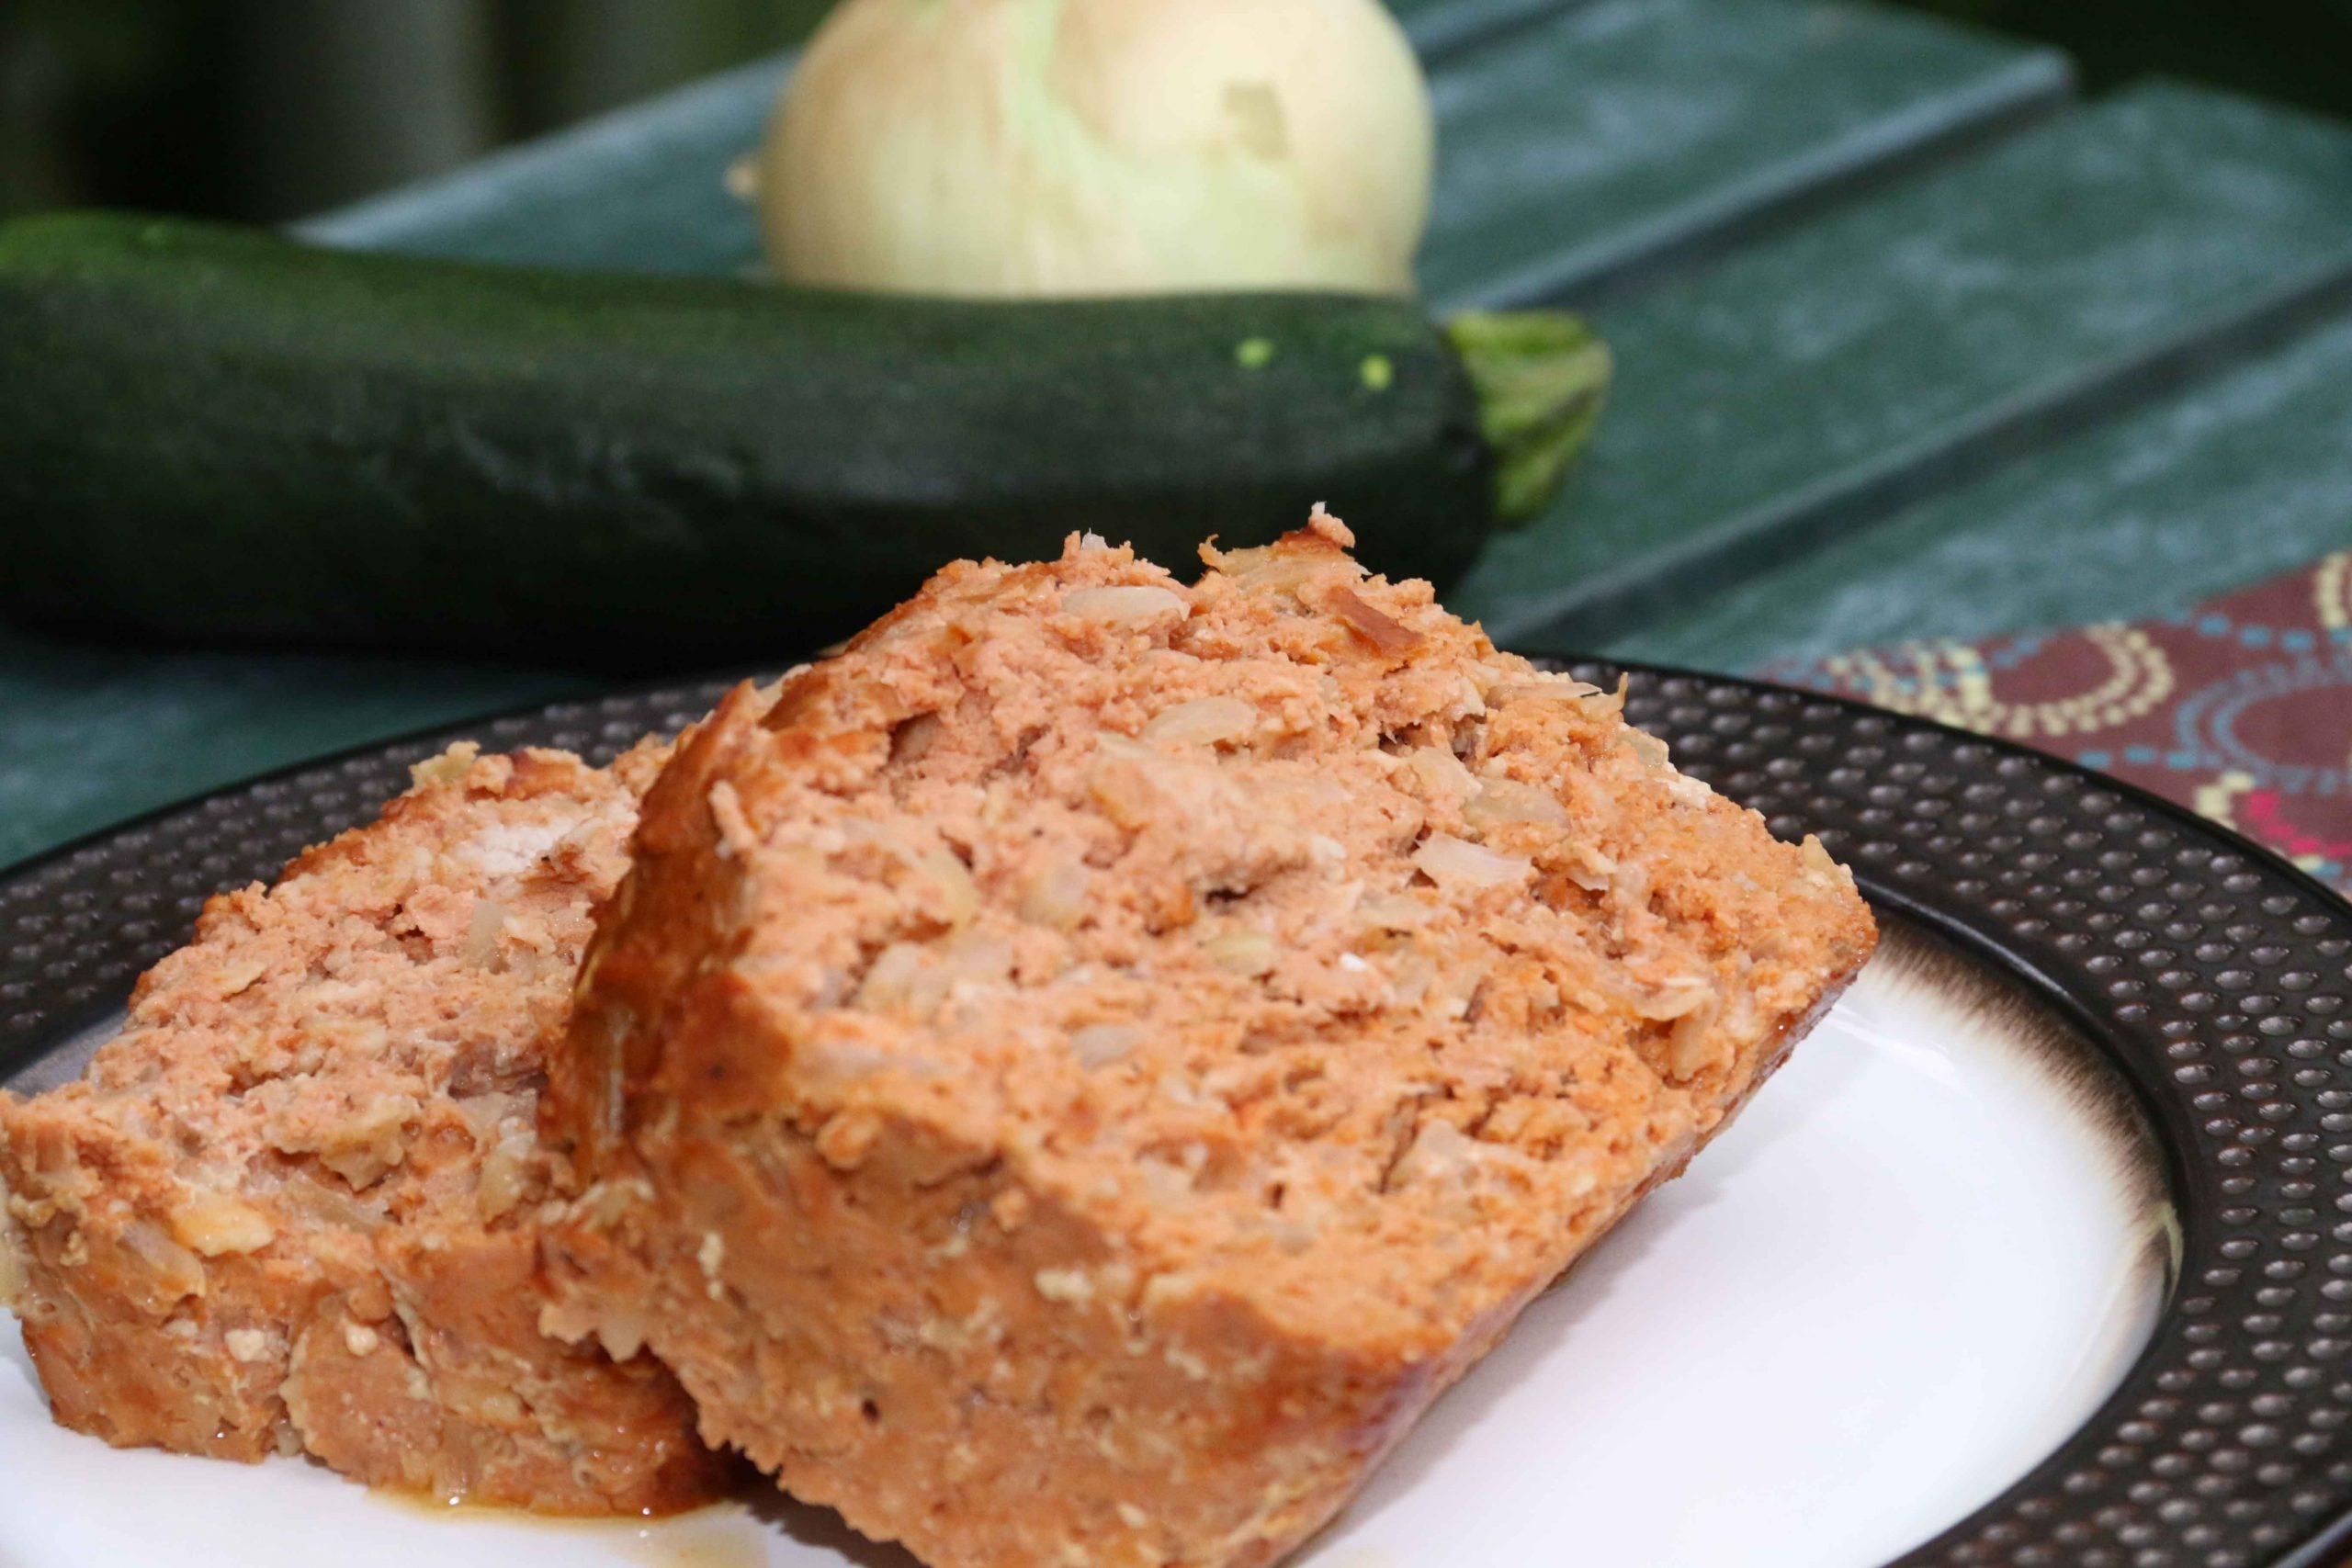 This healthy meatloaf recipe is loaded with zucchini and tasty flavors. You can choose your meat but don't skip the veggies! You'll love this one.